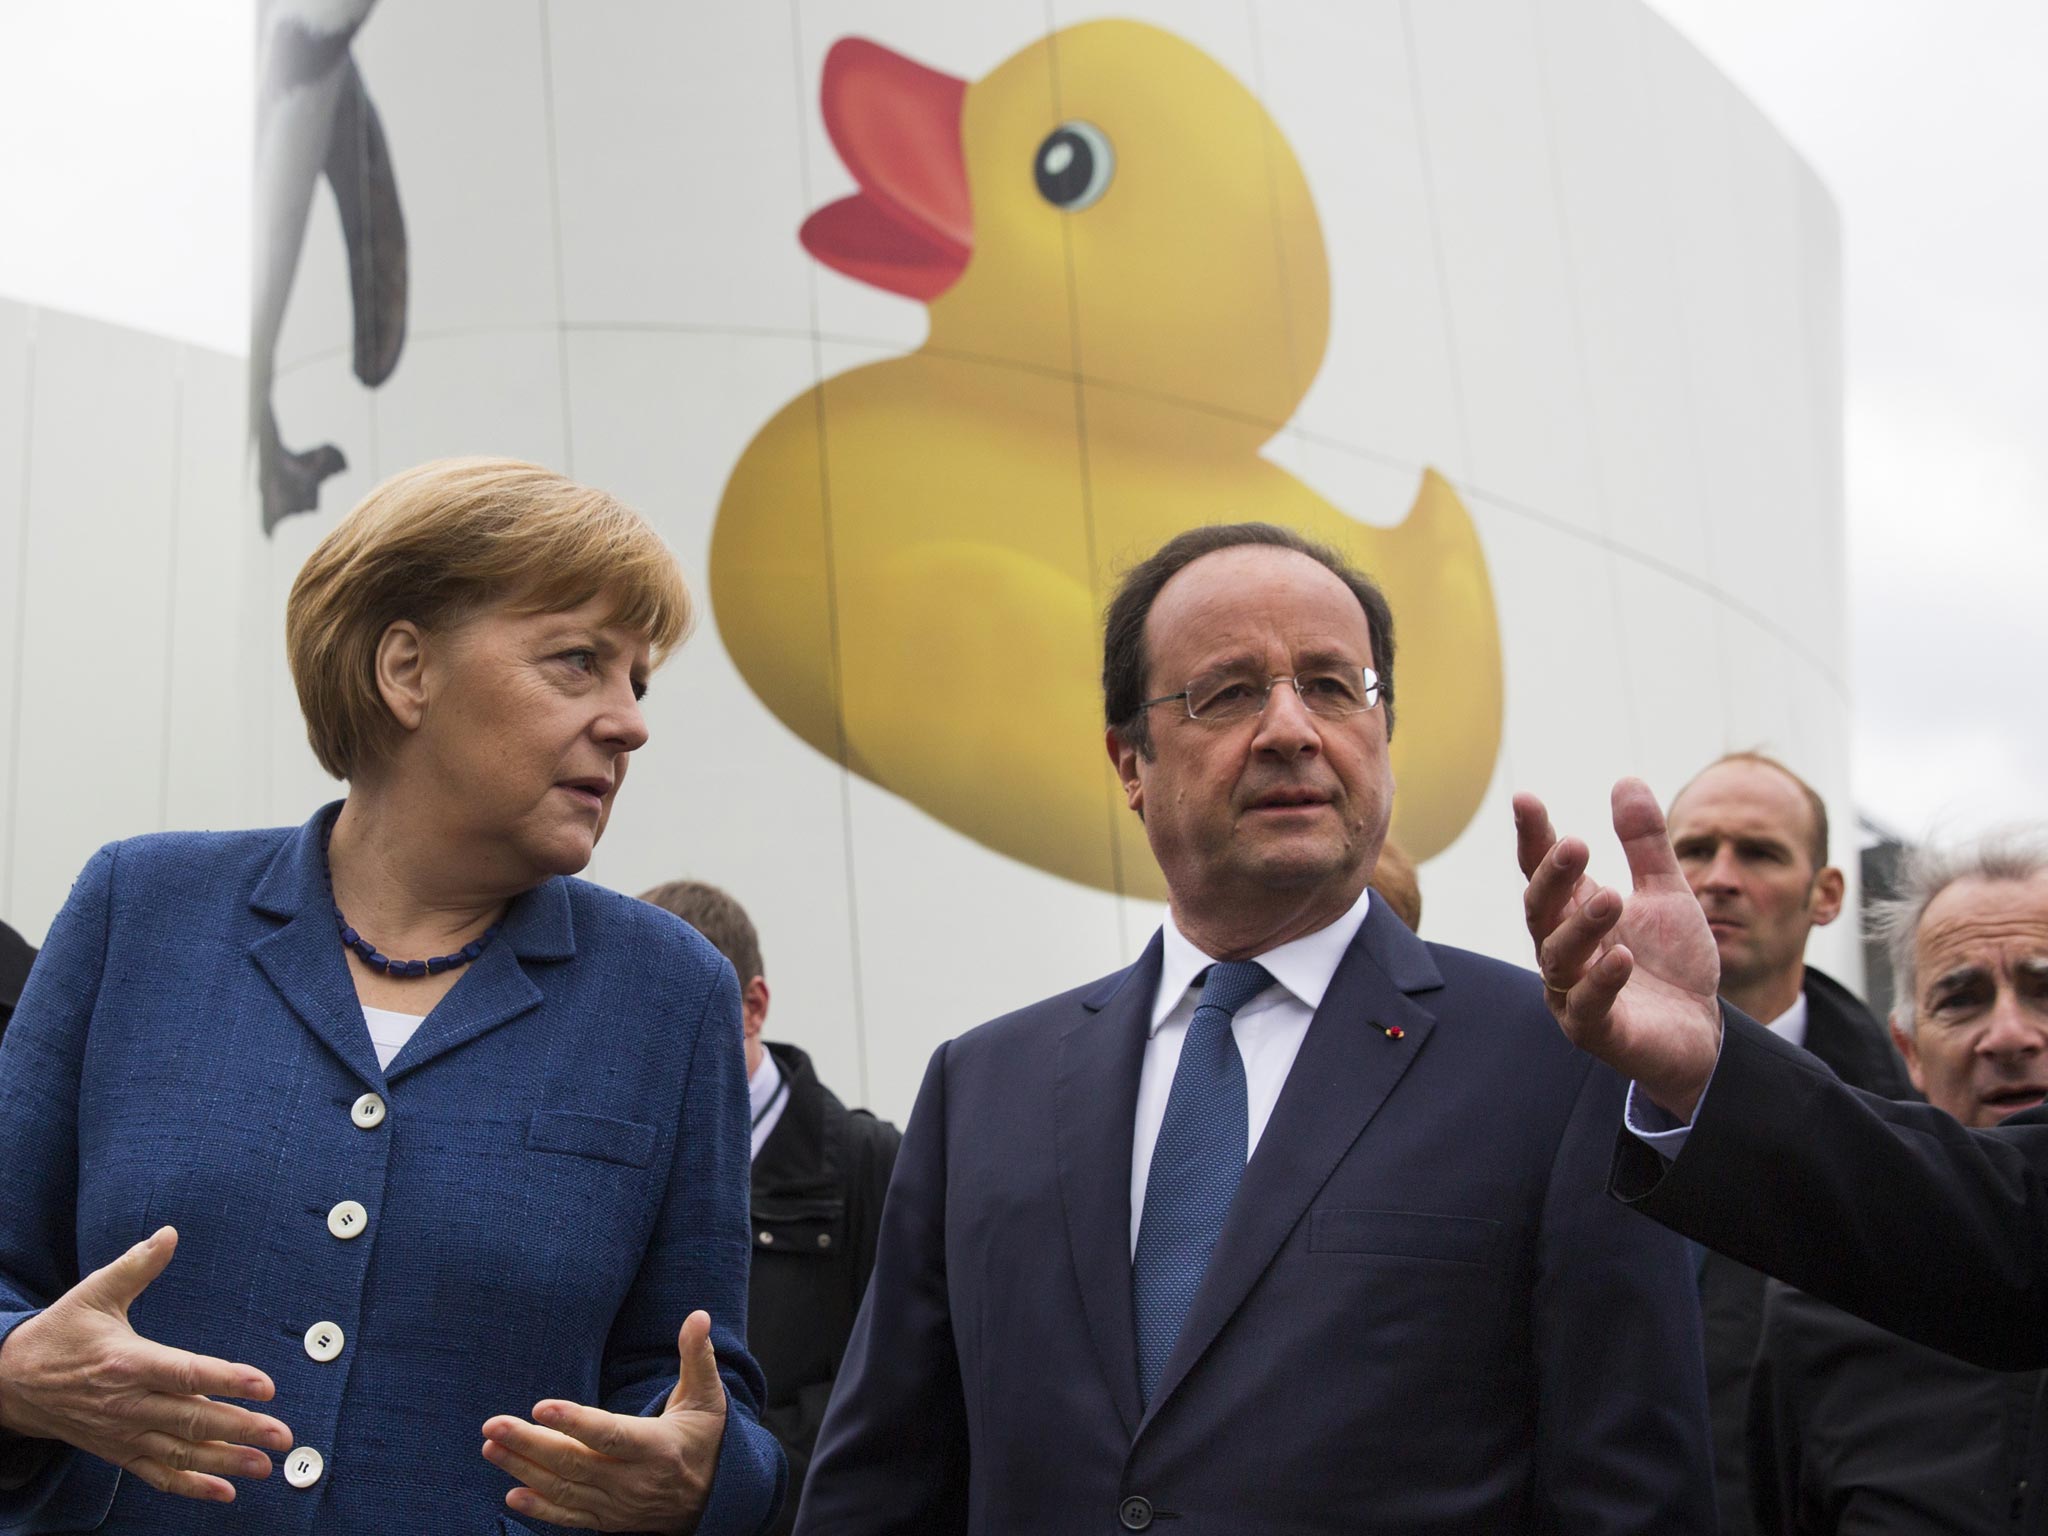 Ducks in a row: François Hollande responded to a US
offer for France’s Alstom with new powers to block bids